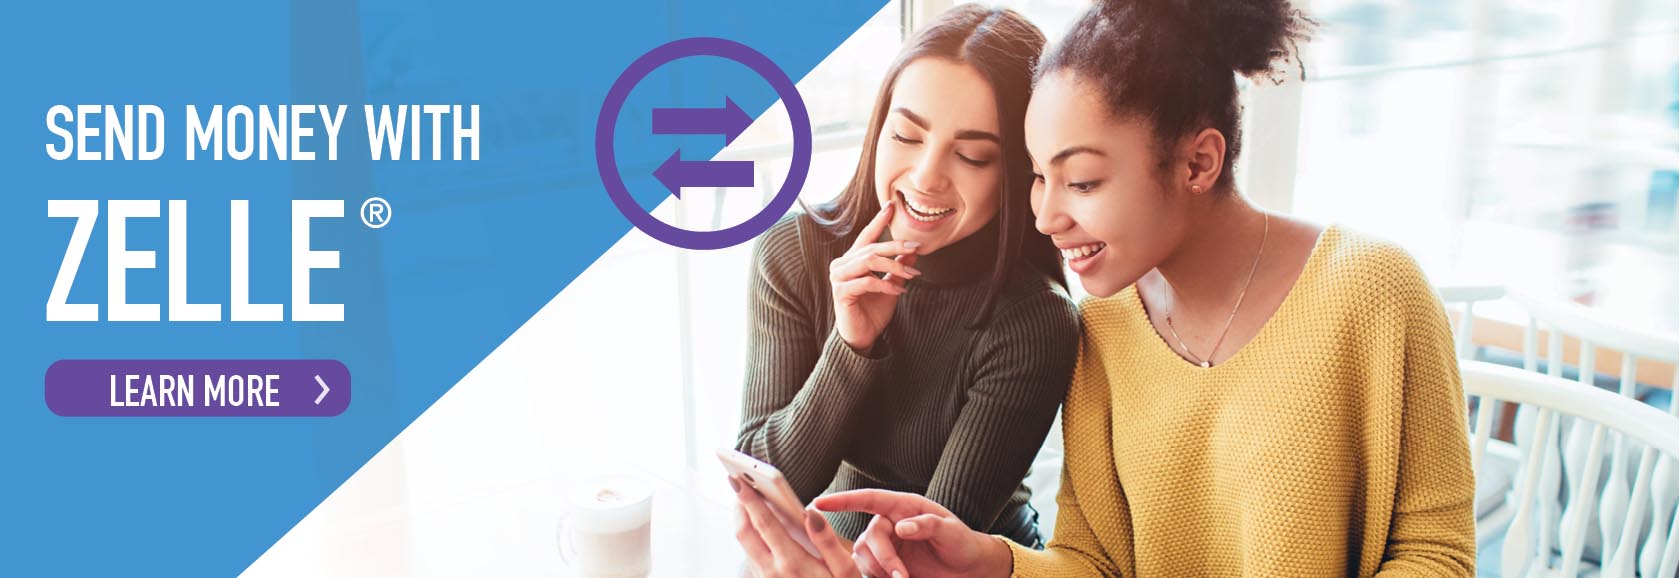 Send money to friends and family with Zelle®